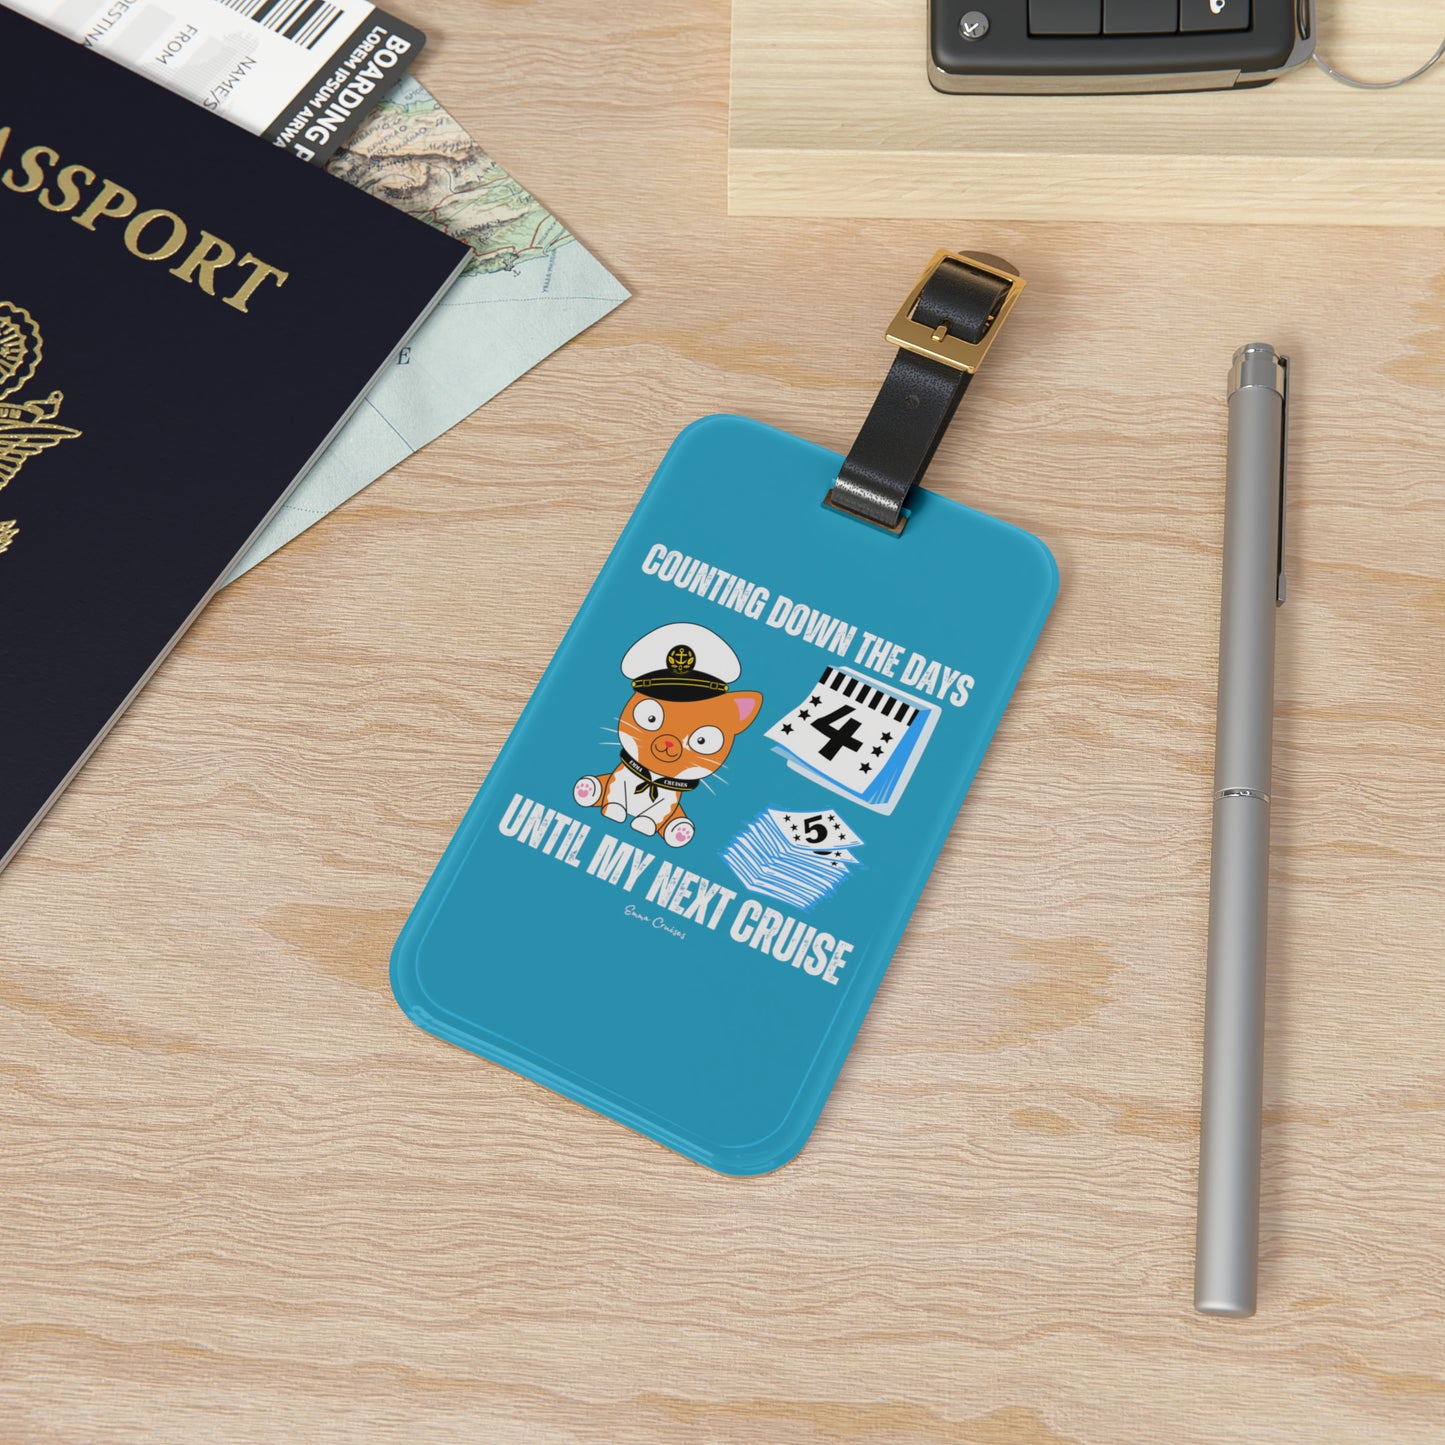 Counting Down the Days - Luggage Tag